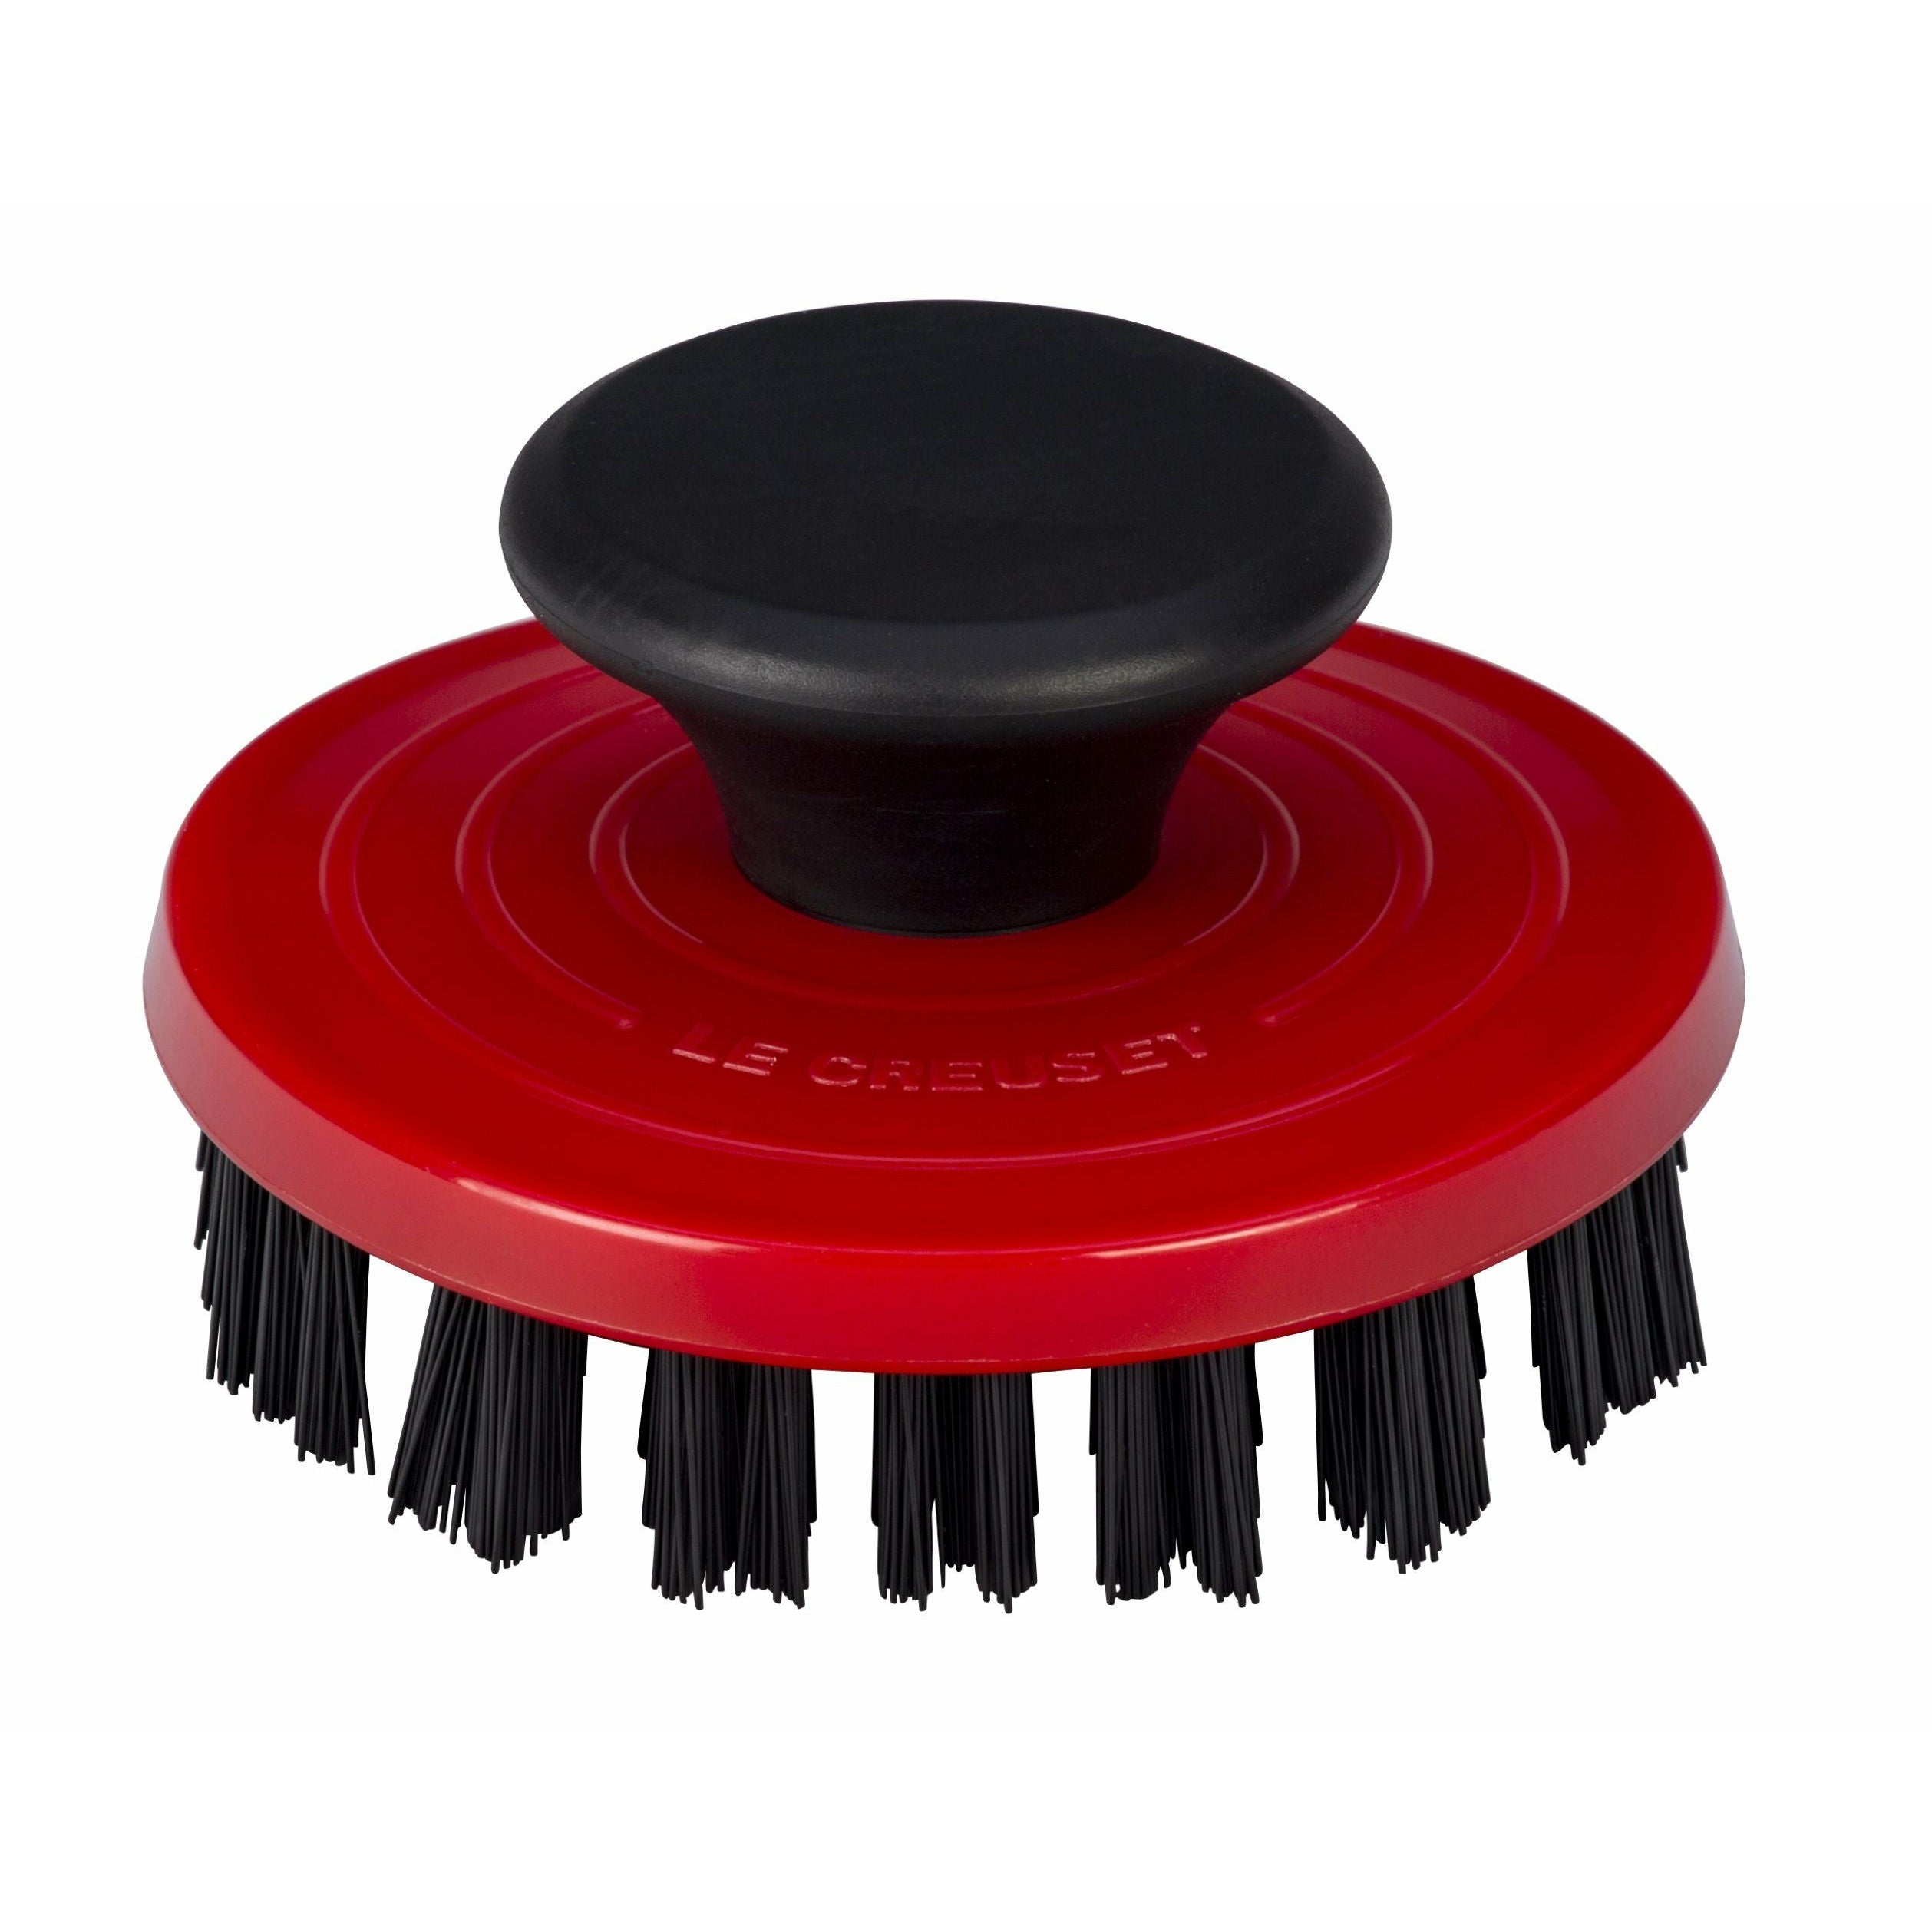 Le Creuset Cleaning Brush, Cherry Red